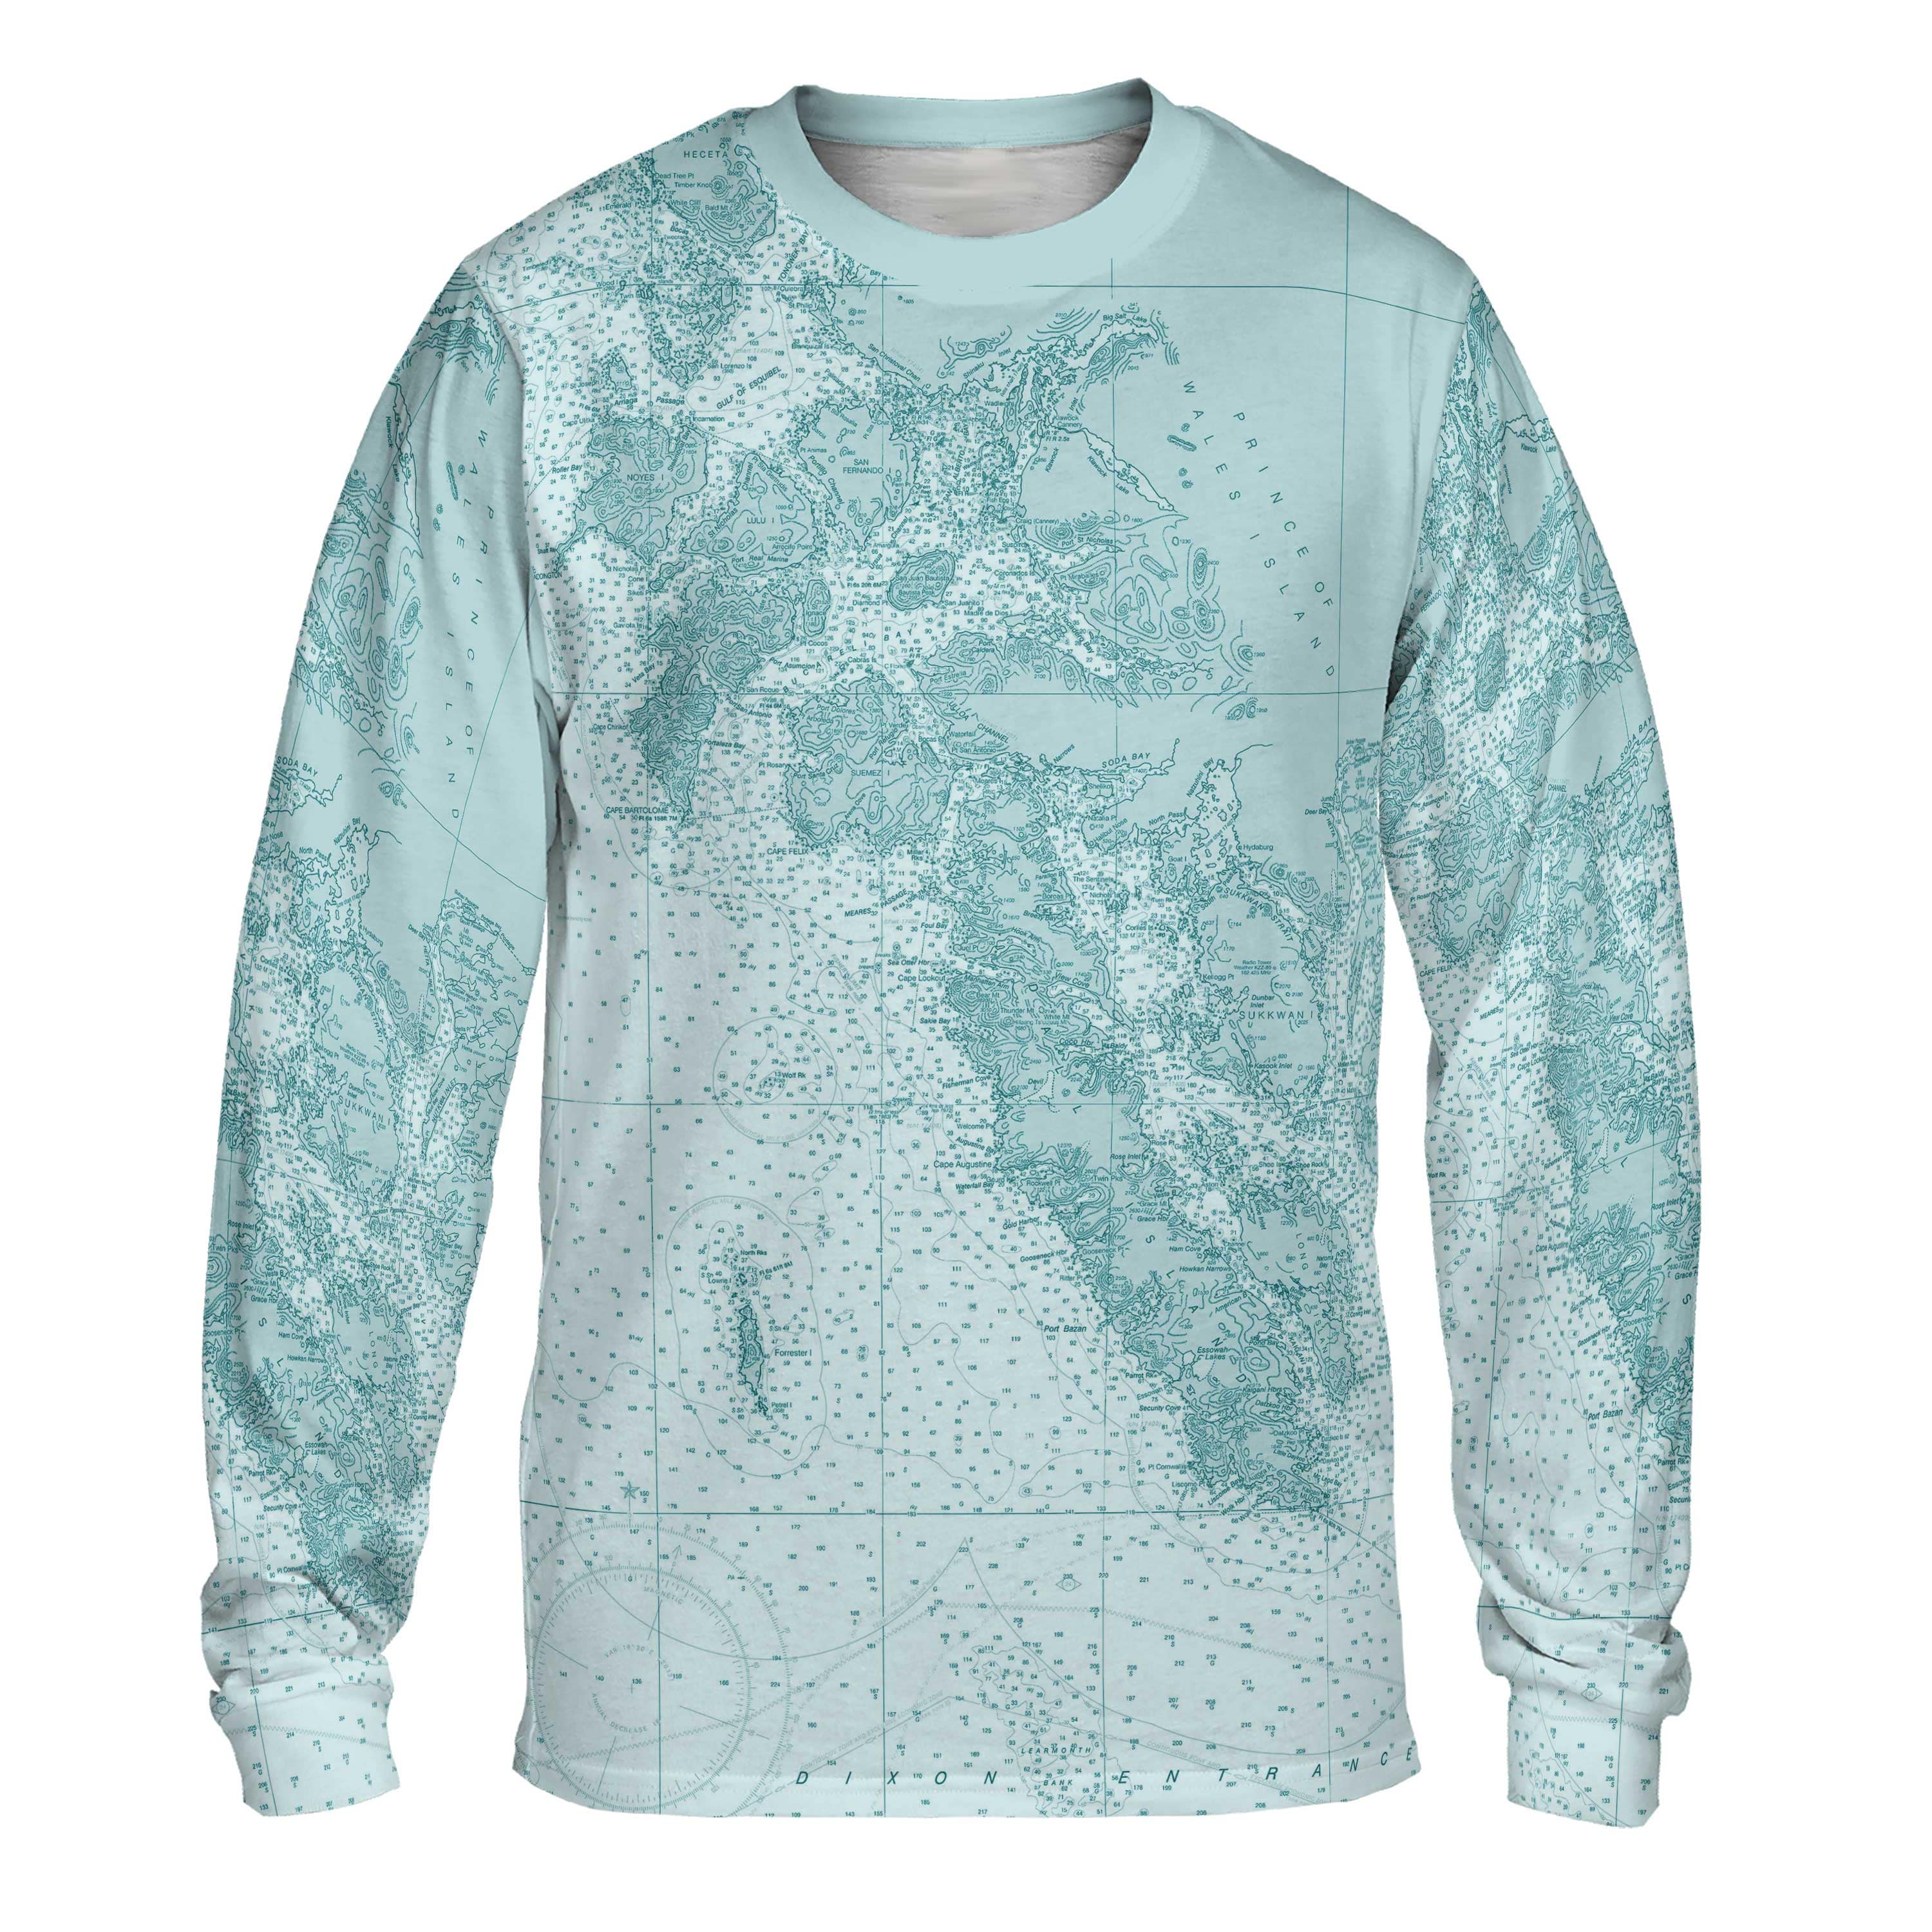 The Gulf of Esquibel to Dixon Entrance Long Sleeve Tee – Top Deck Gear